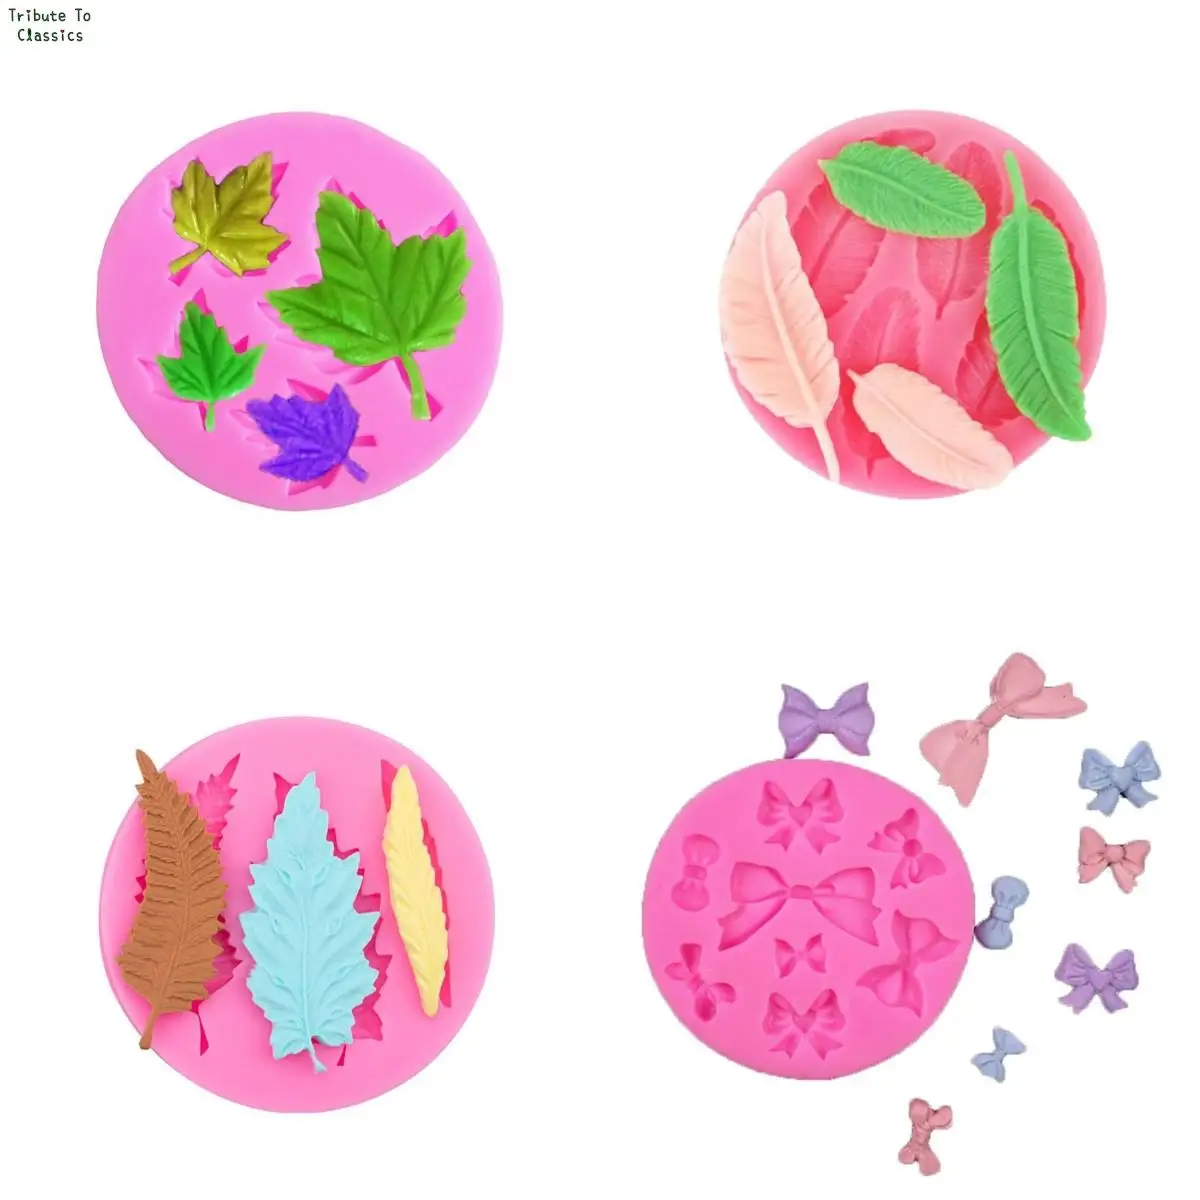 

Birds Feather Sugar Buttons Silicone Mold DIY Fondant Cake Decorating Tools Chocolate Gumpaste Lace border Mold Baking Utensils